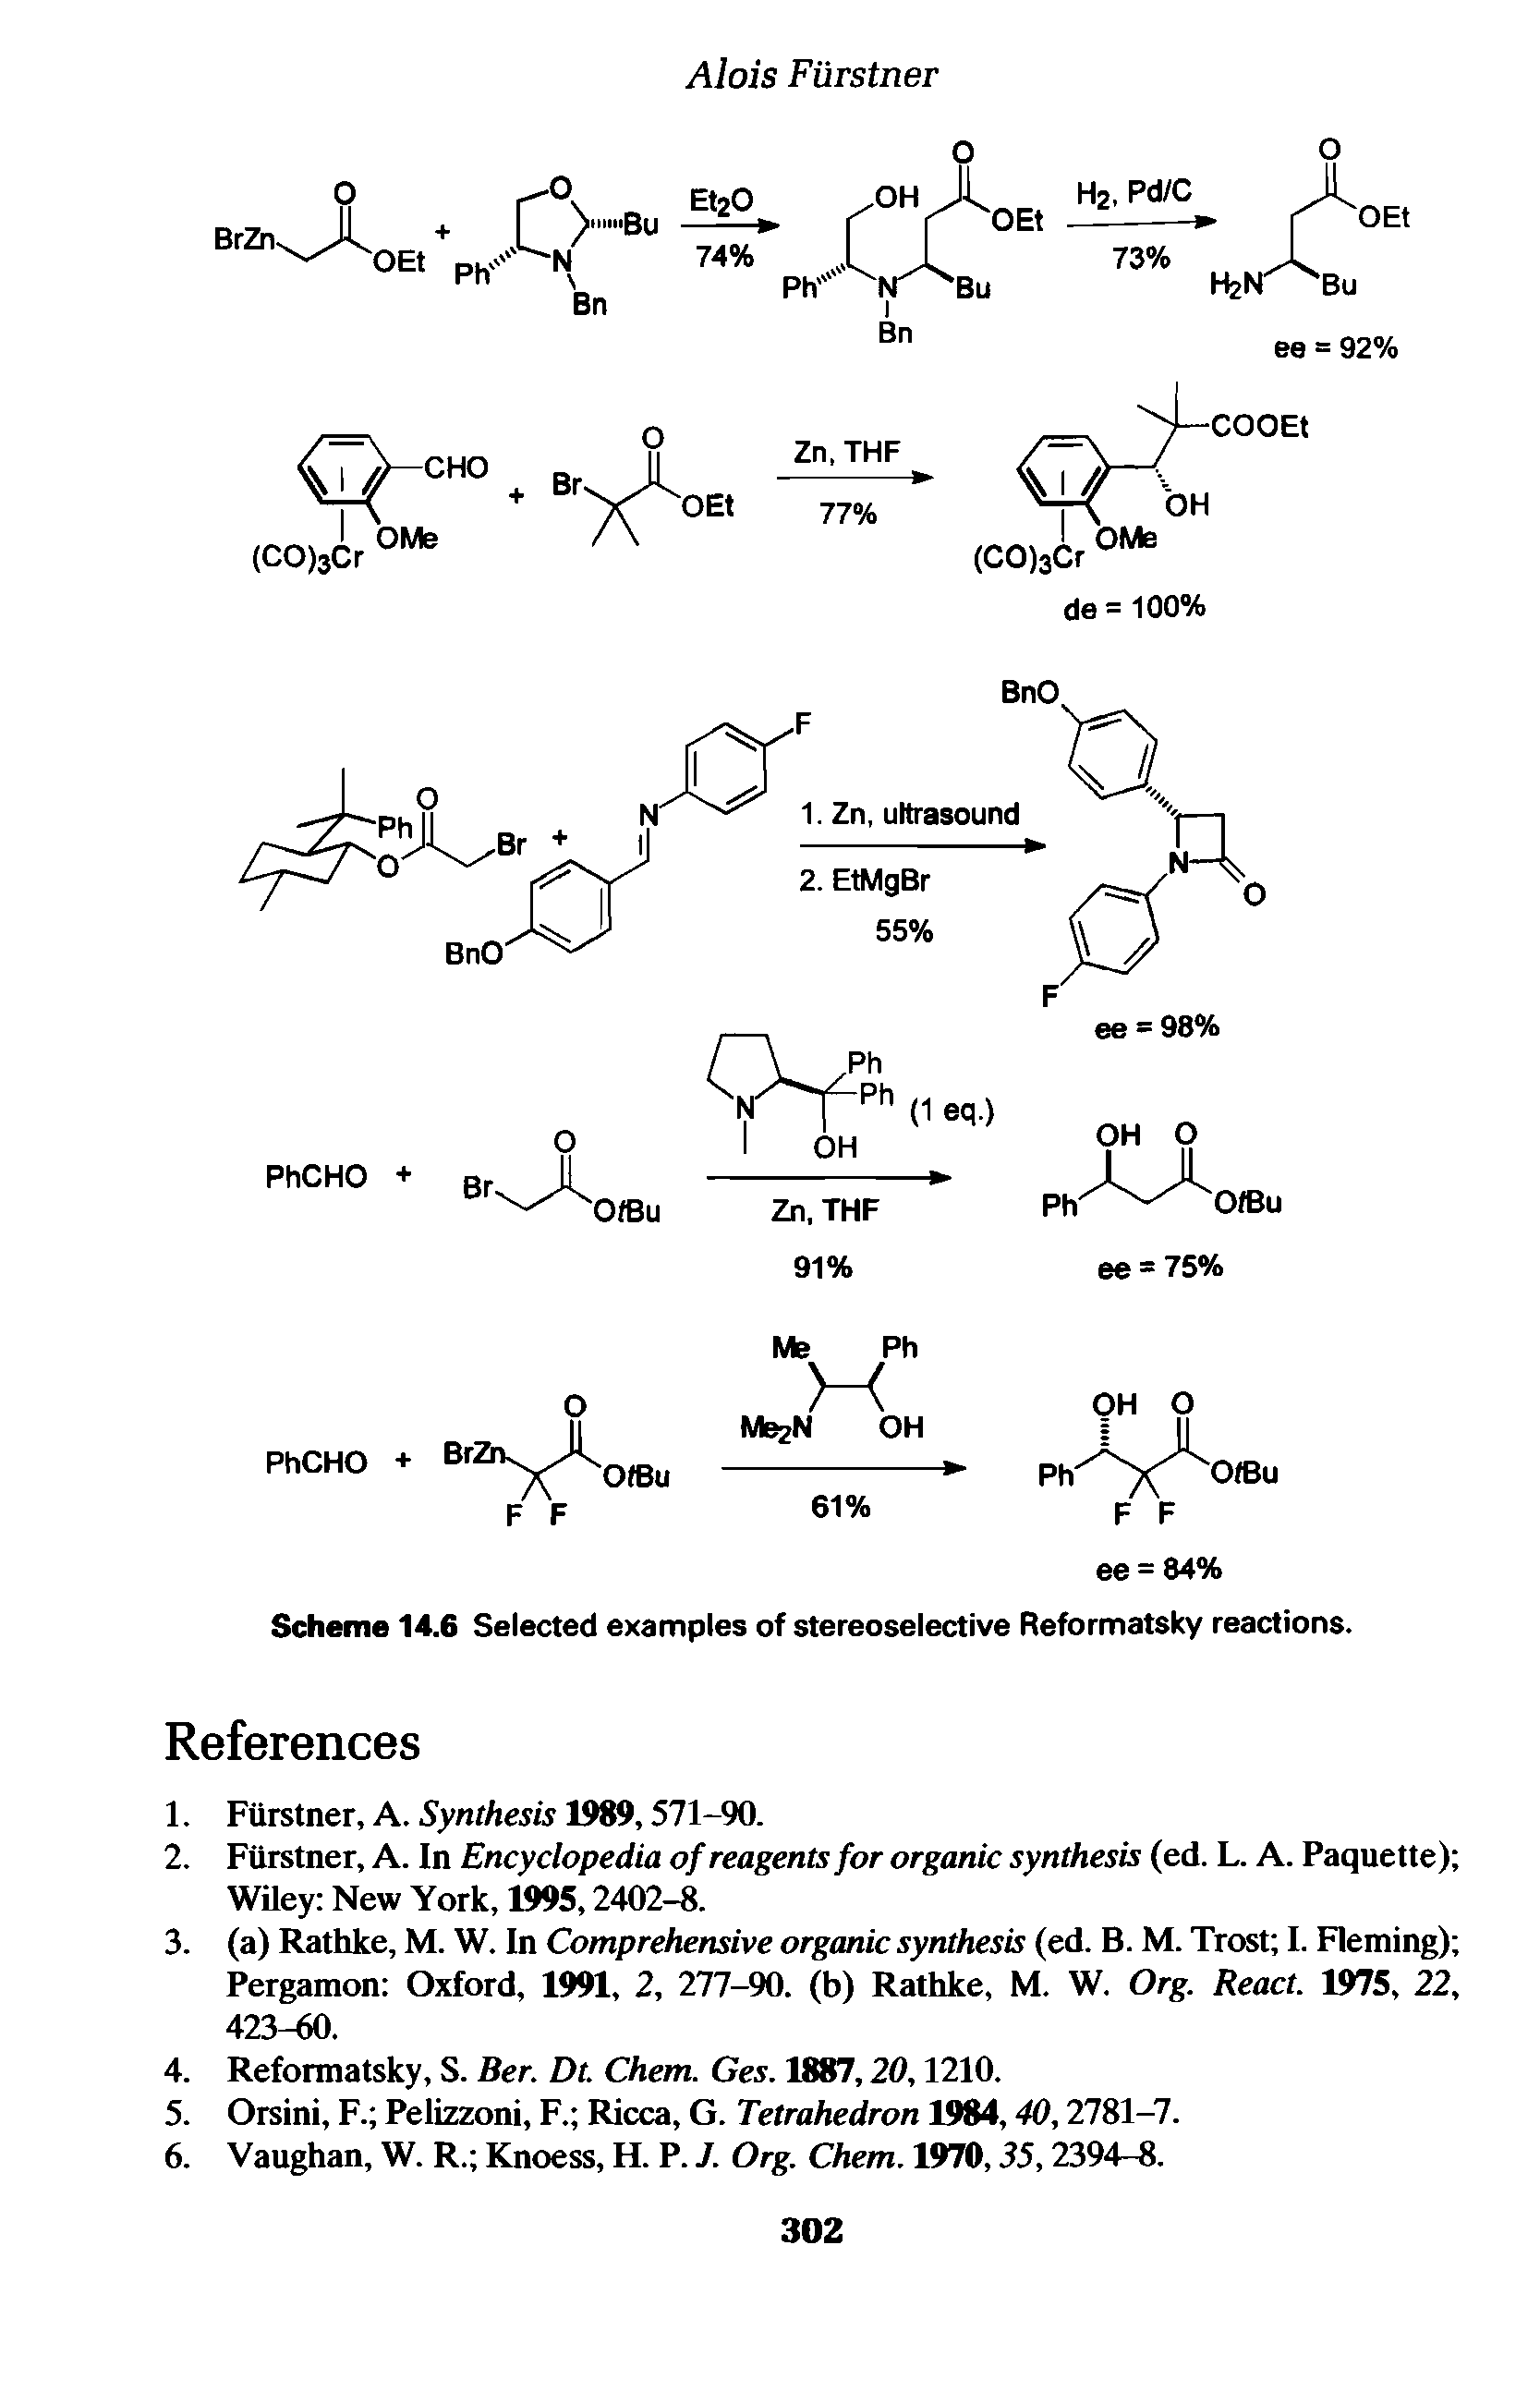 Scheme 14.6 Selected examples of stereoselective Reformatsky reactions.